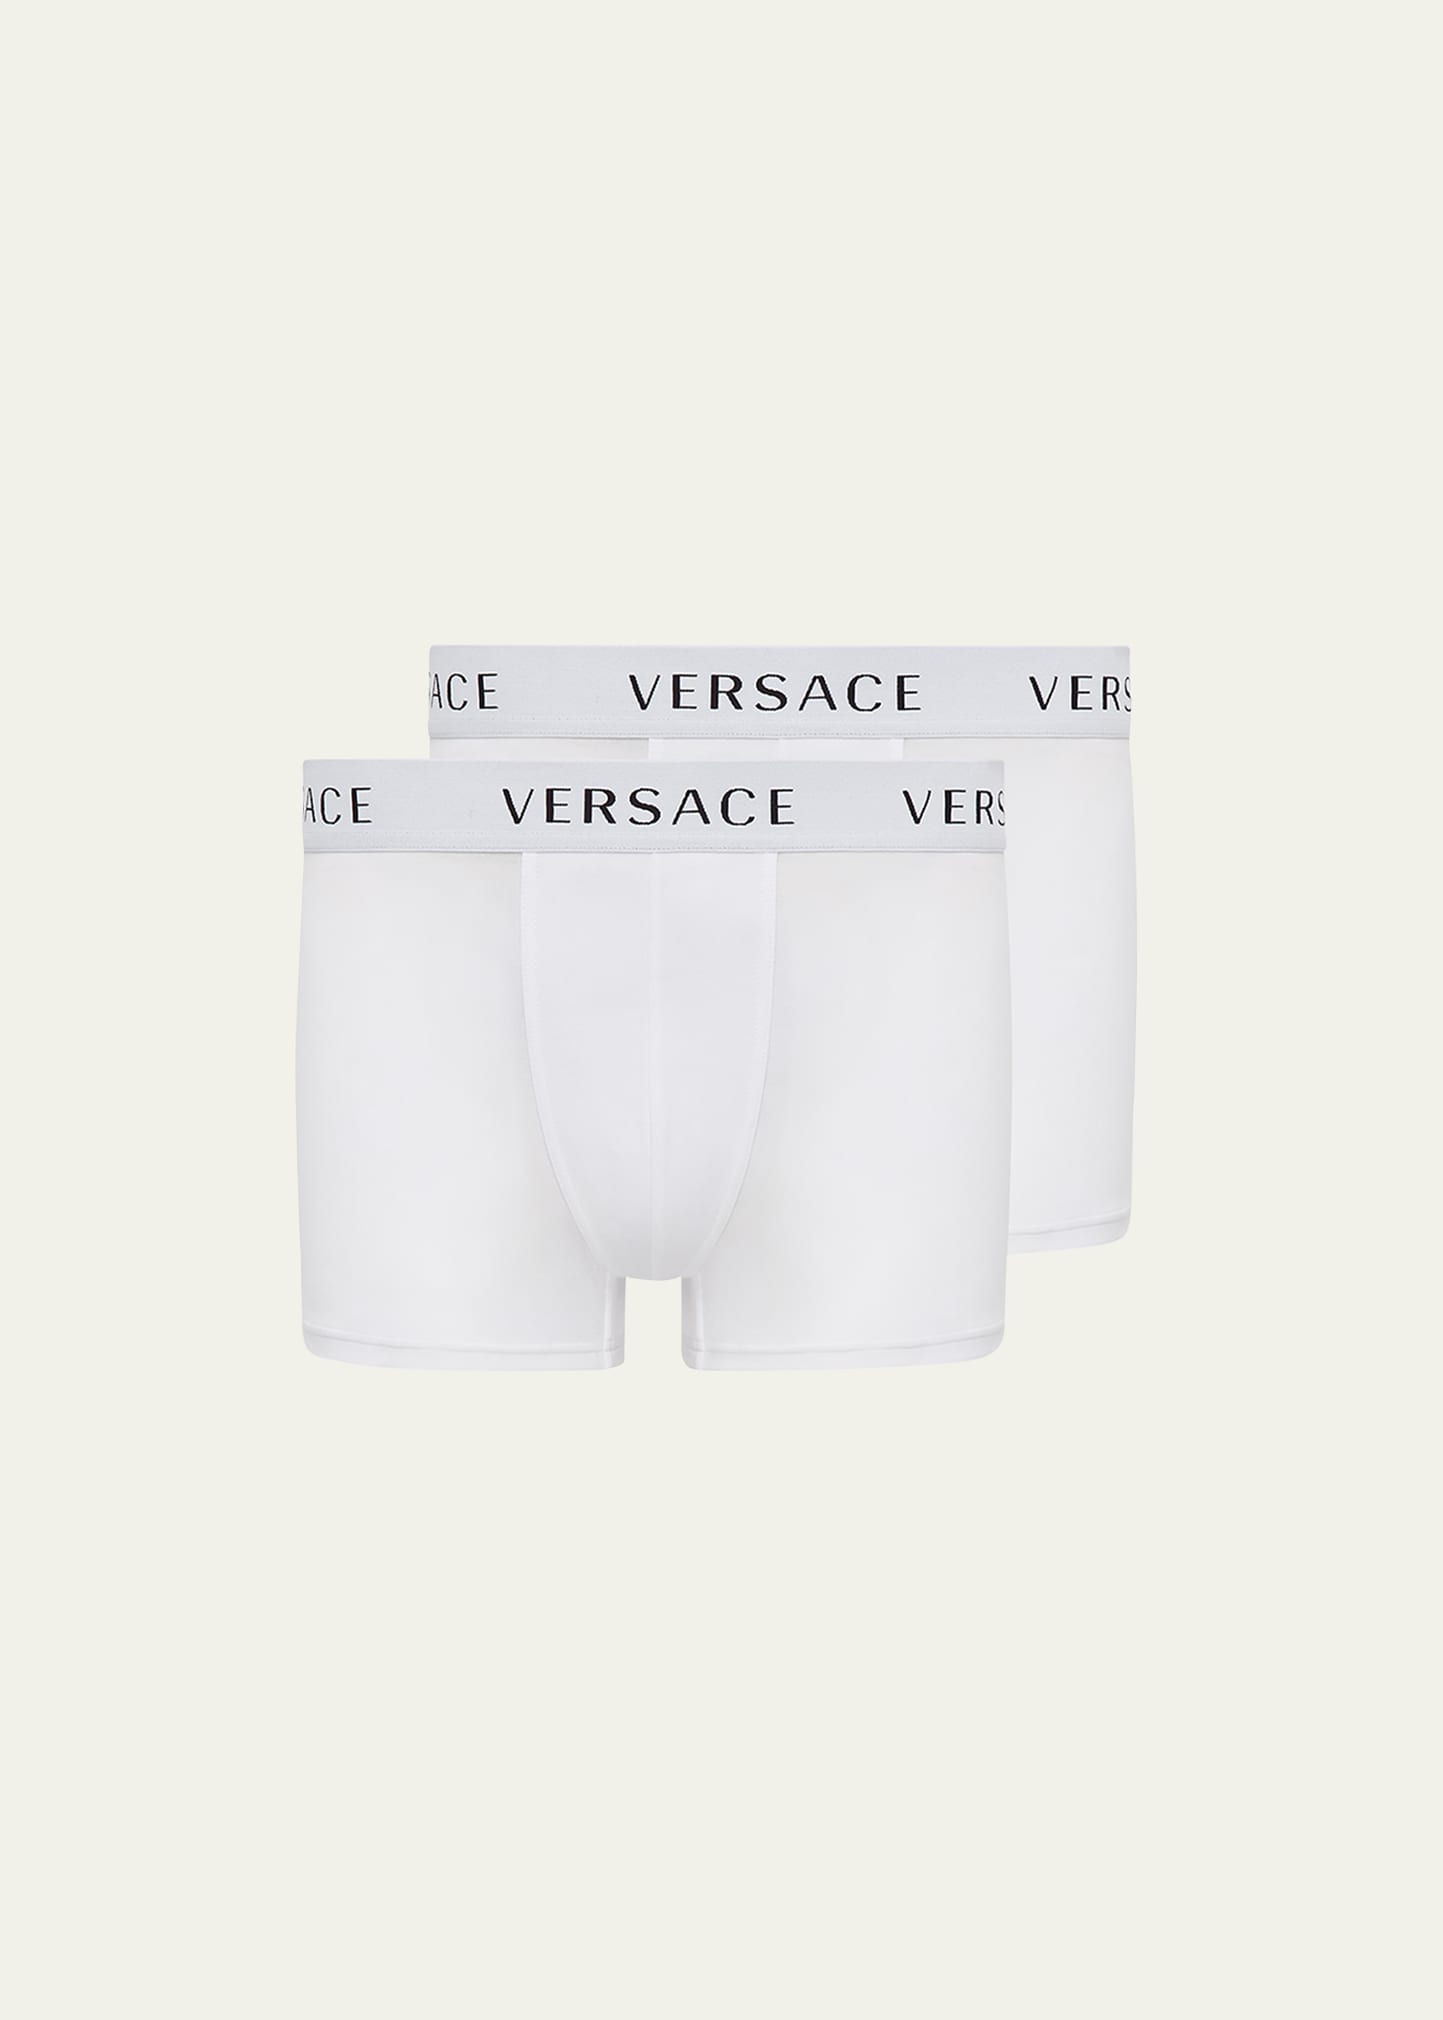 Versace Men's 2-pack Long Boxer Briefs In White